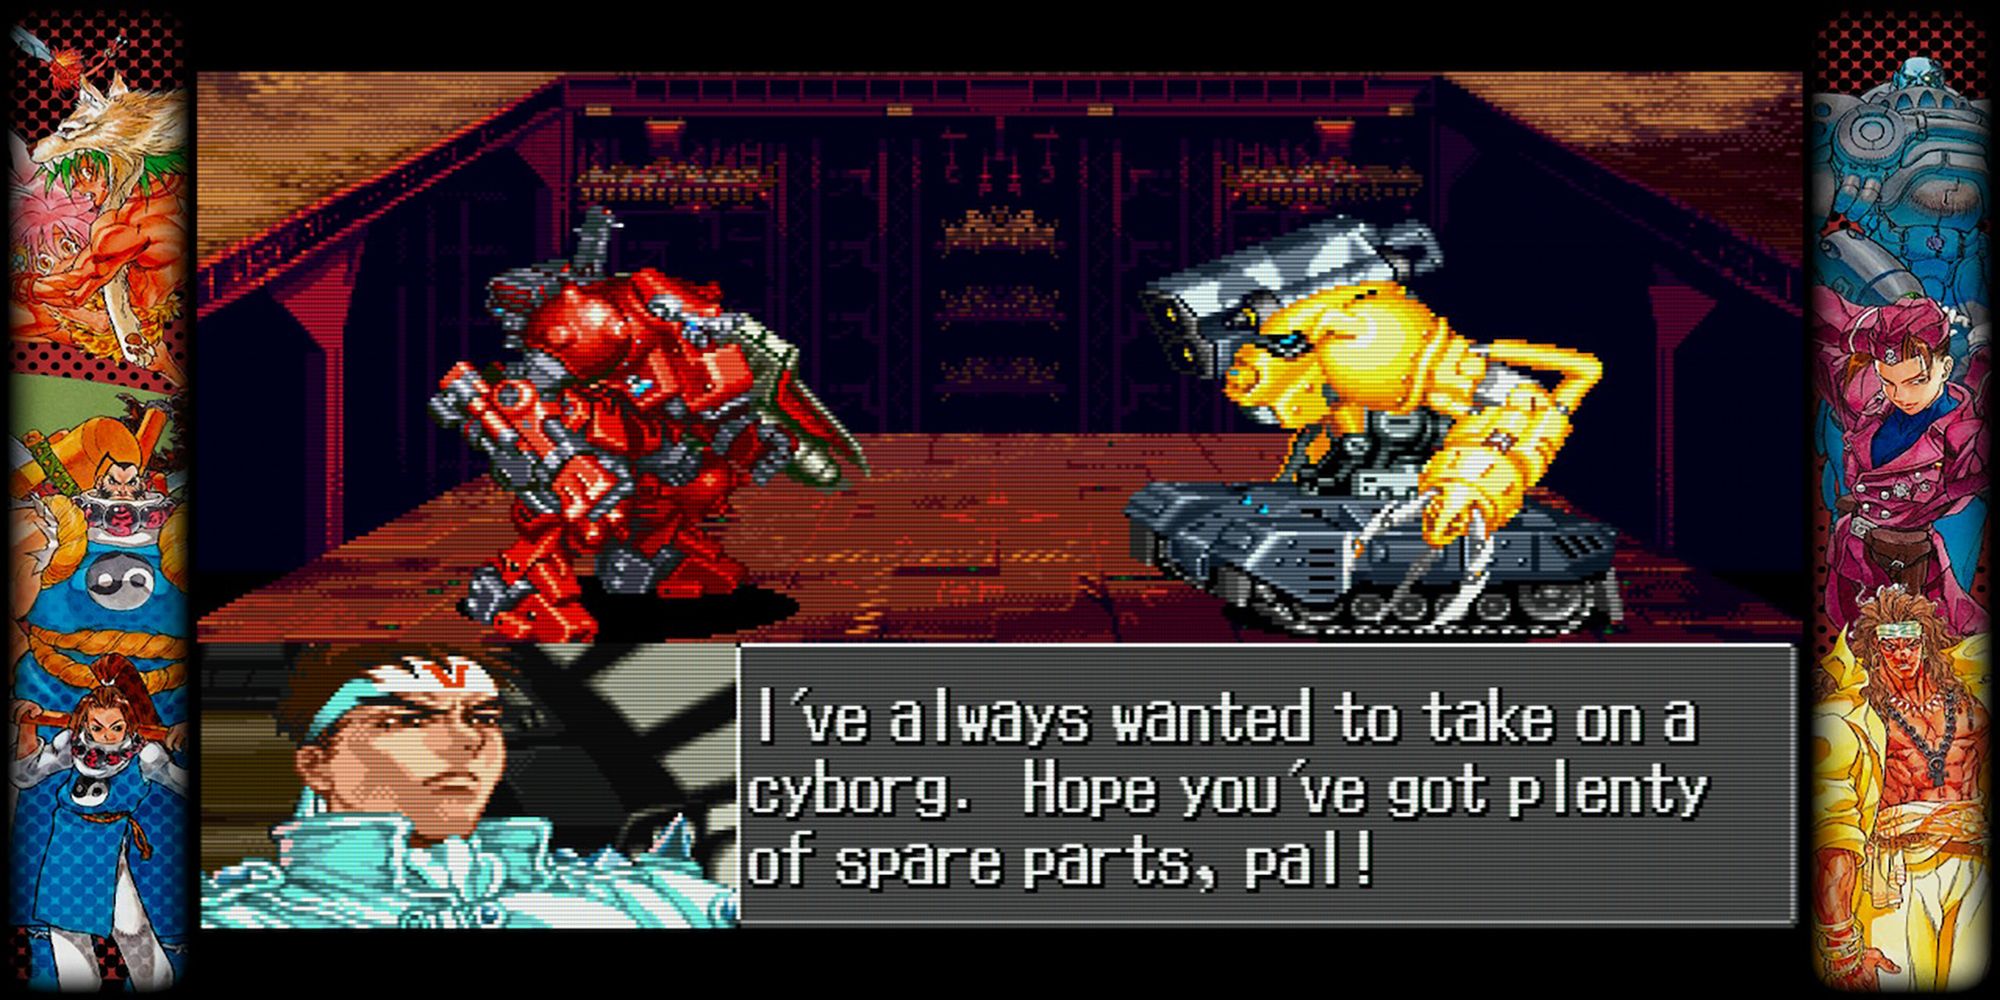 Jin finds a Lightning model cyborg on mech platform in Cyberbots, a game in Capcom Fighting Collection.